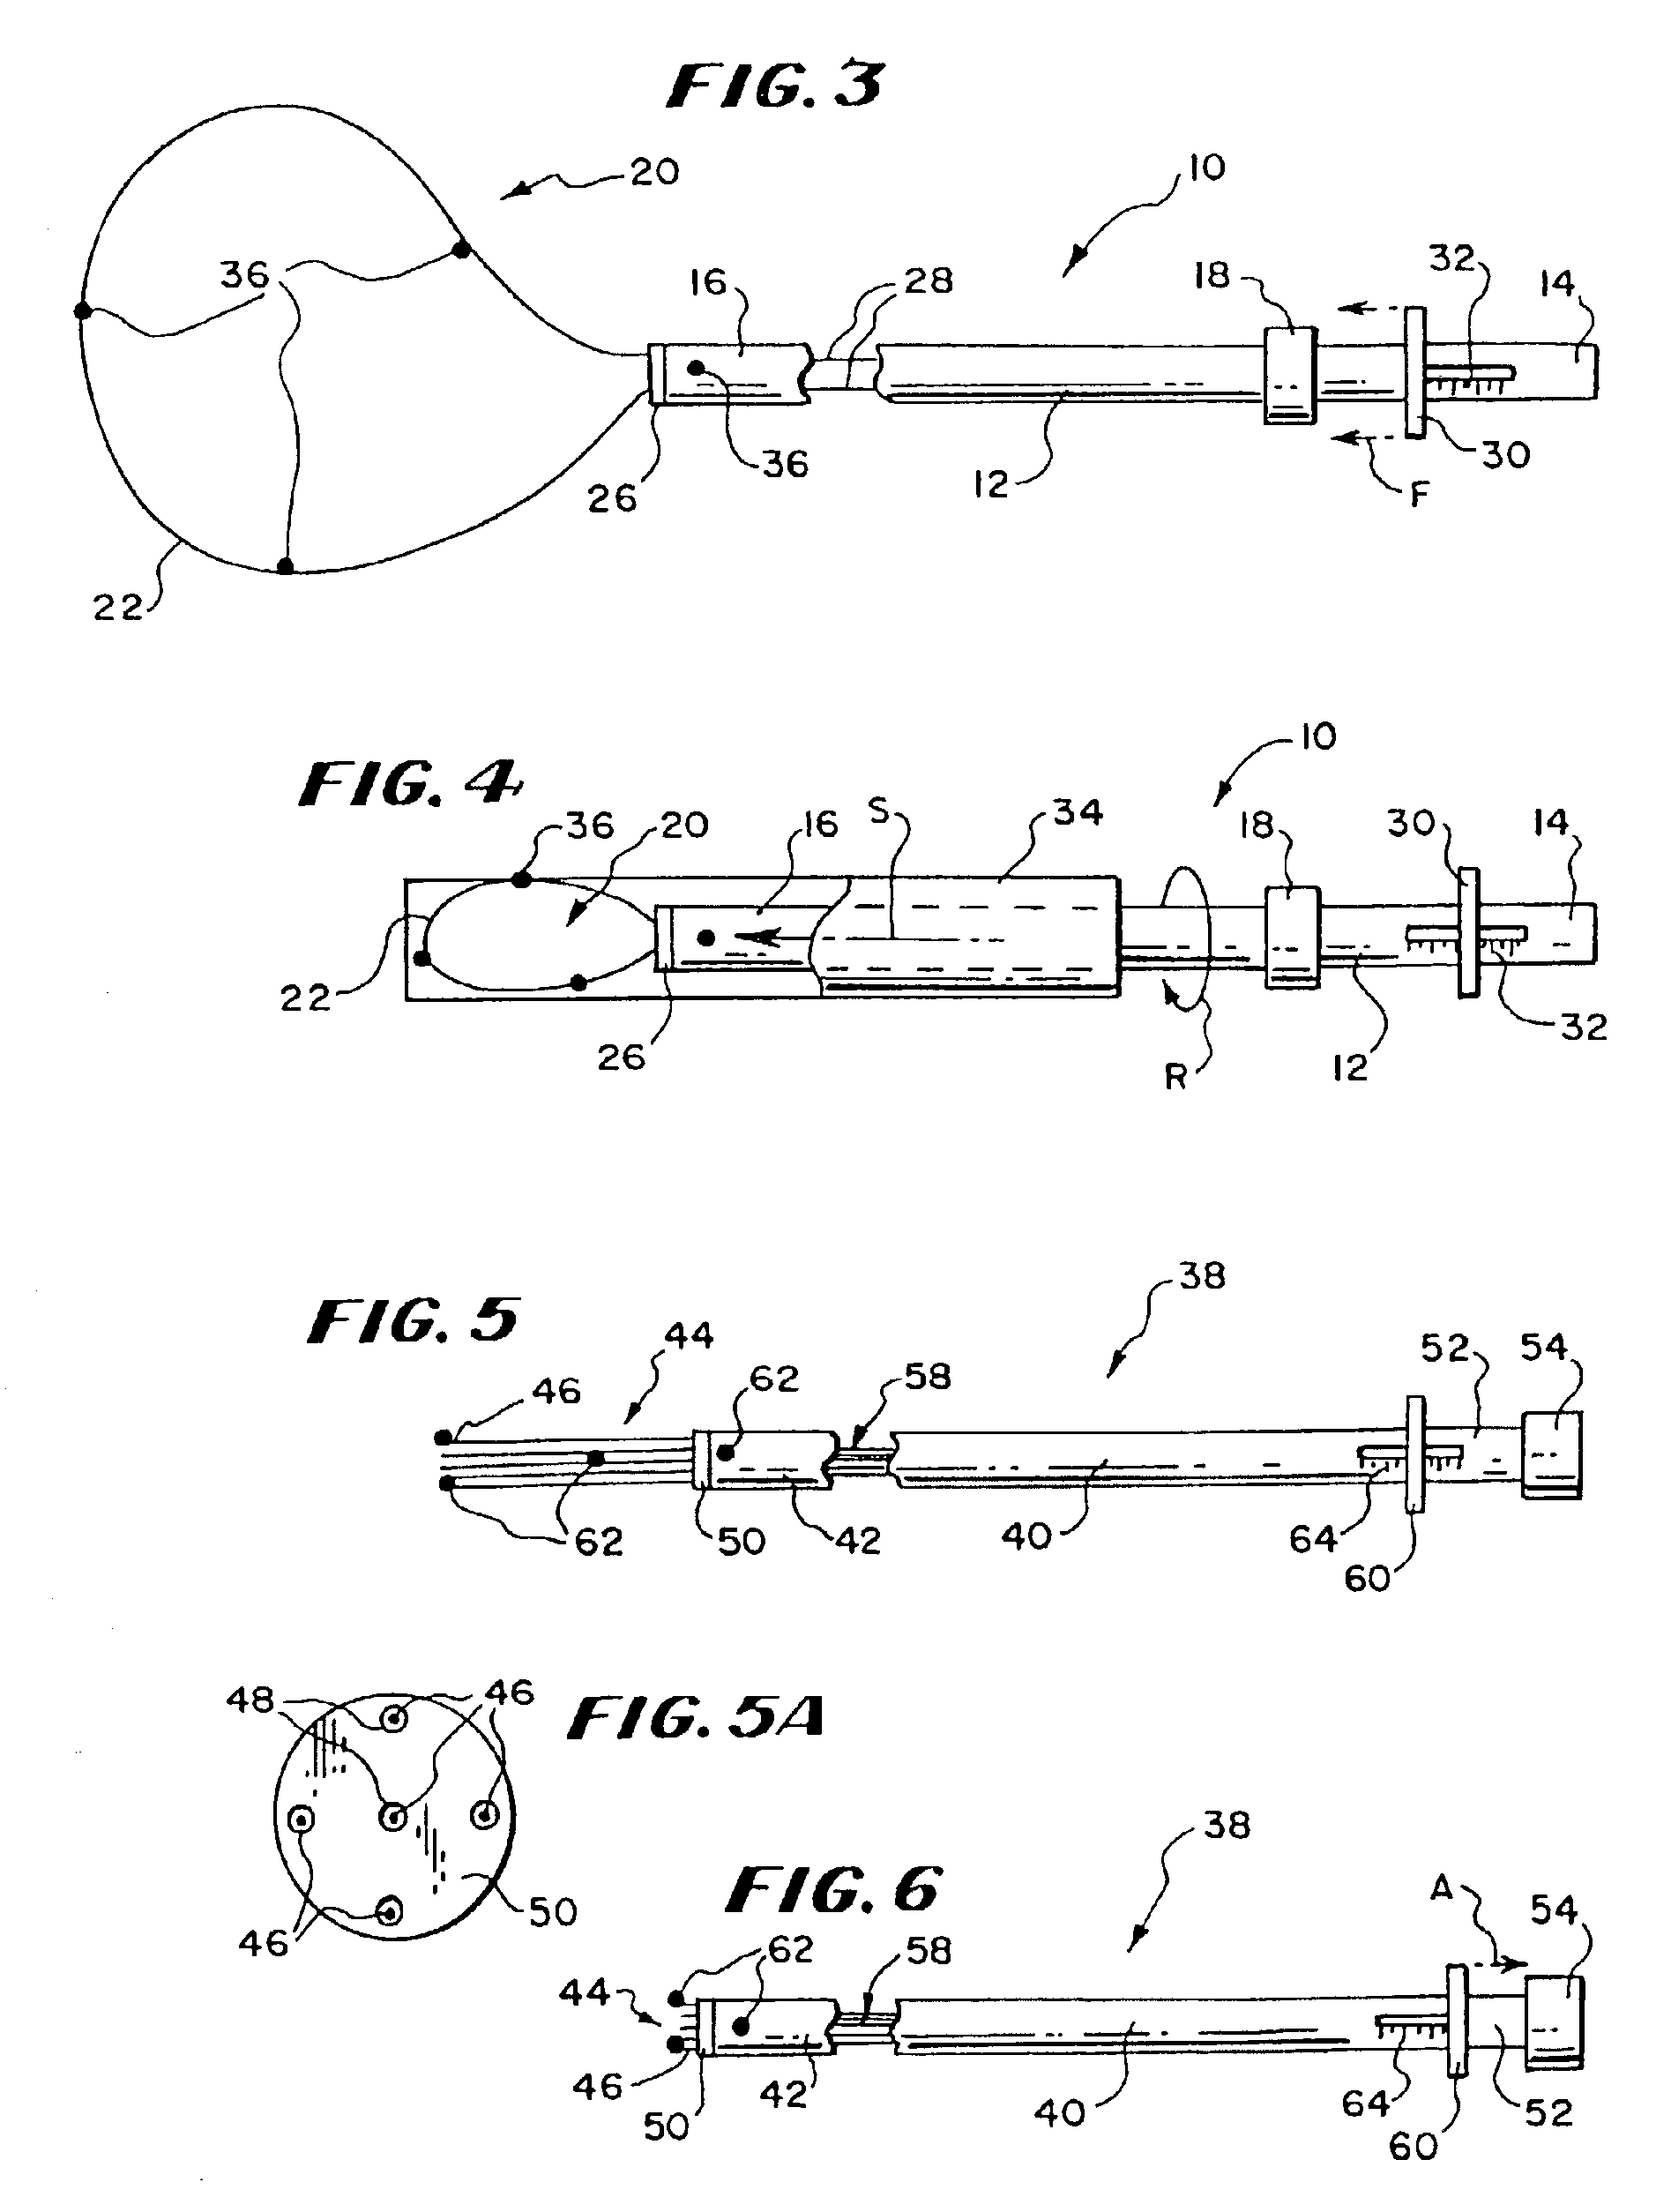 Structures and methods for creating cavities in interior body regions